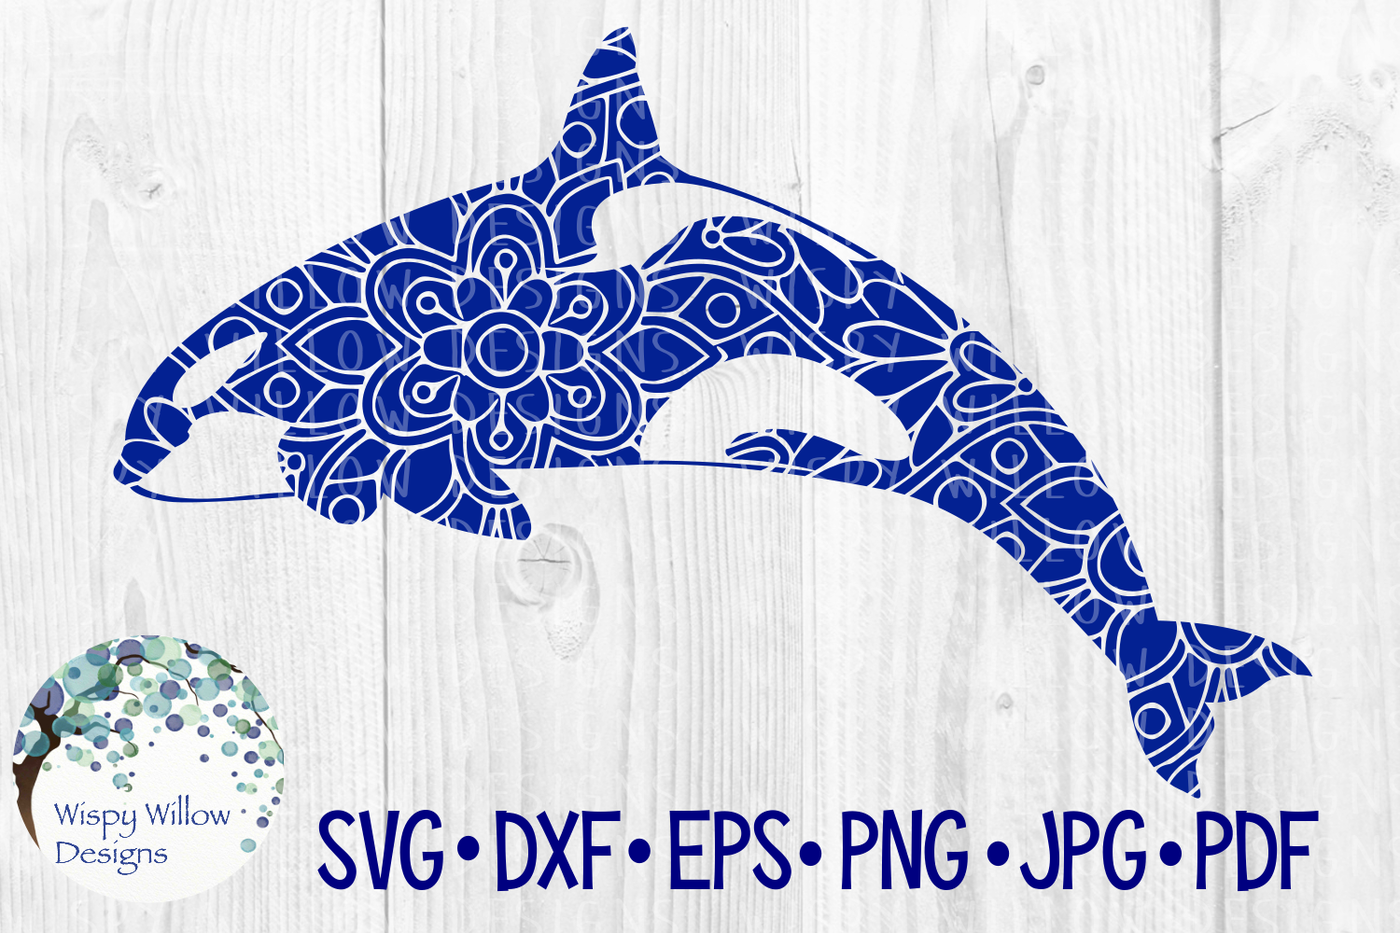 Download Orca Killer Whale Floral Mandala Svg Dxf Eps Png Jpg Pdf By Wispy Willow Designs Thehungryjpeg Com